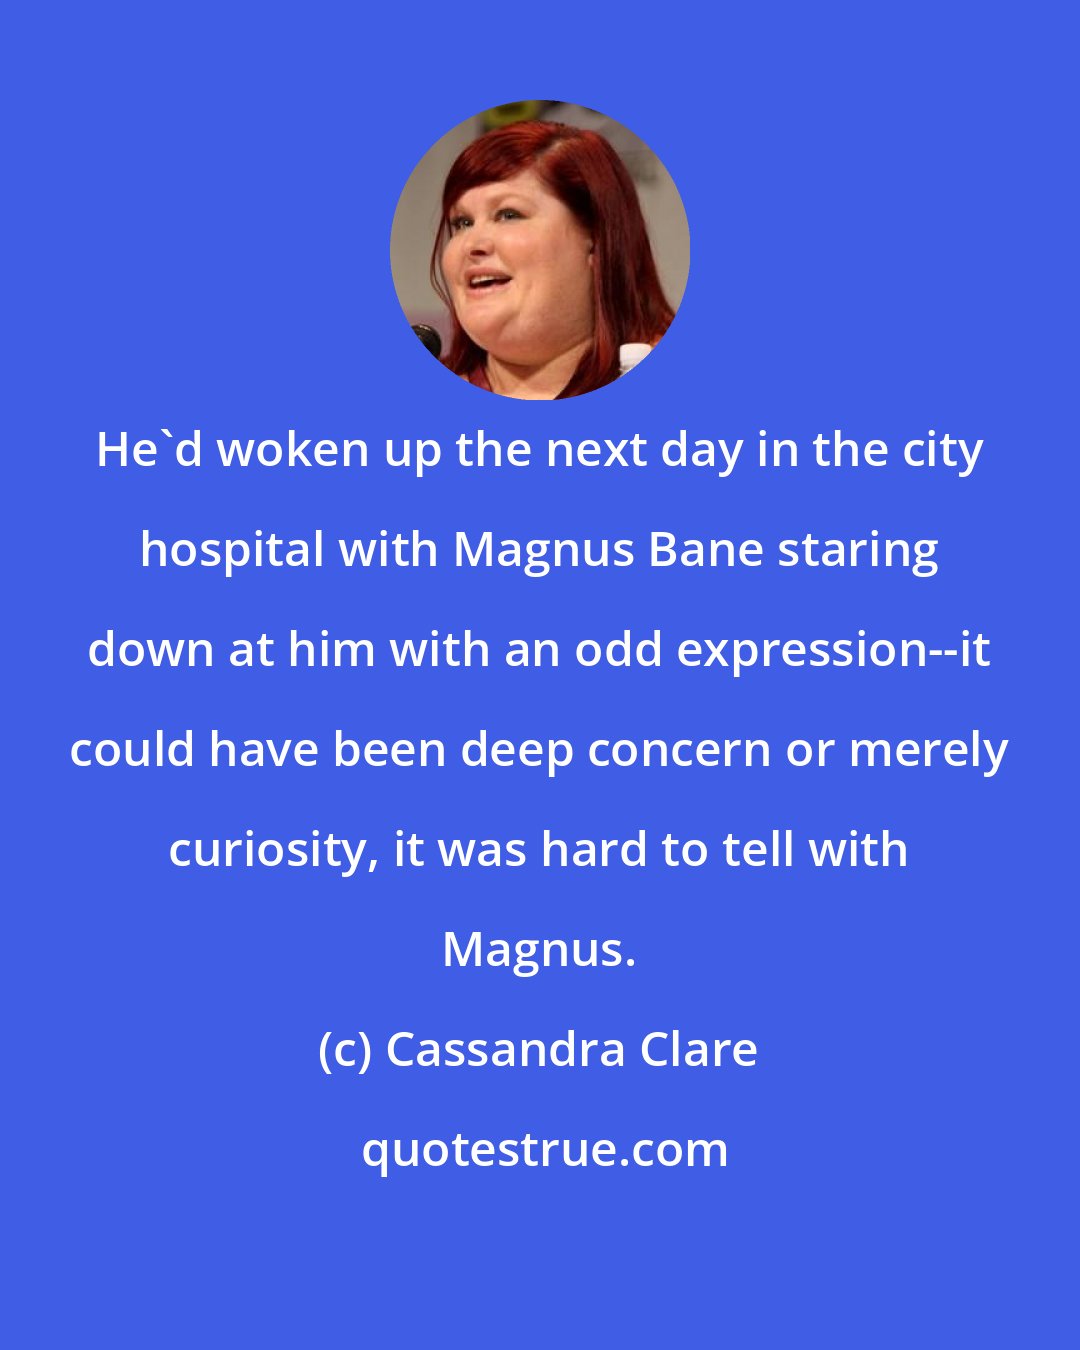 Cassandra Clare: He'd woken up the next day in the city hospital with Magnus Bane staring down at him with an odd expression--it could have been deep concern or merely curiosity, it was hard to tell with Magnus.